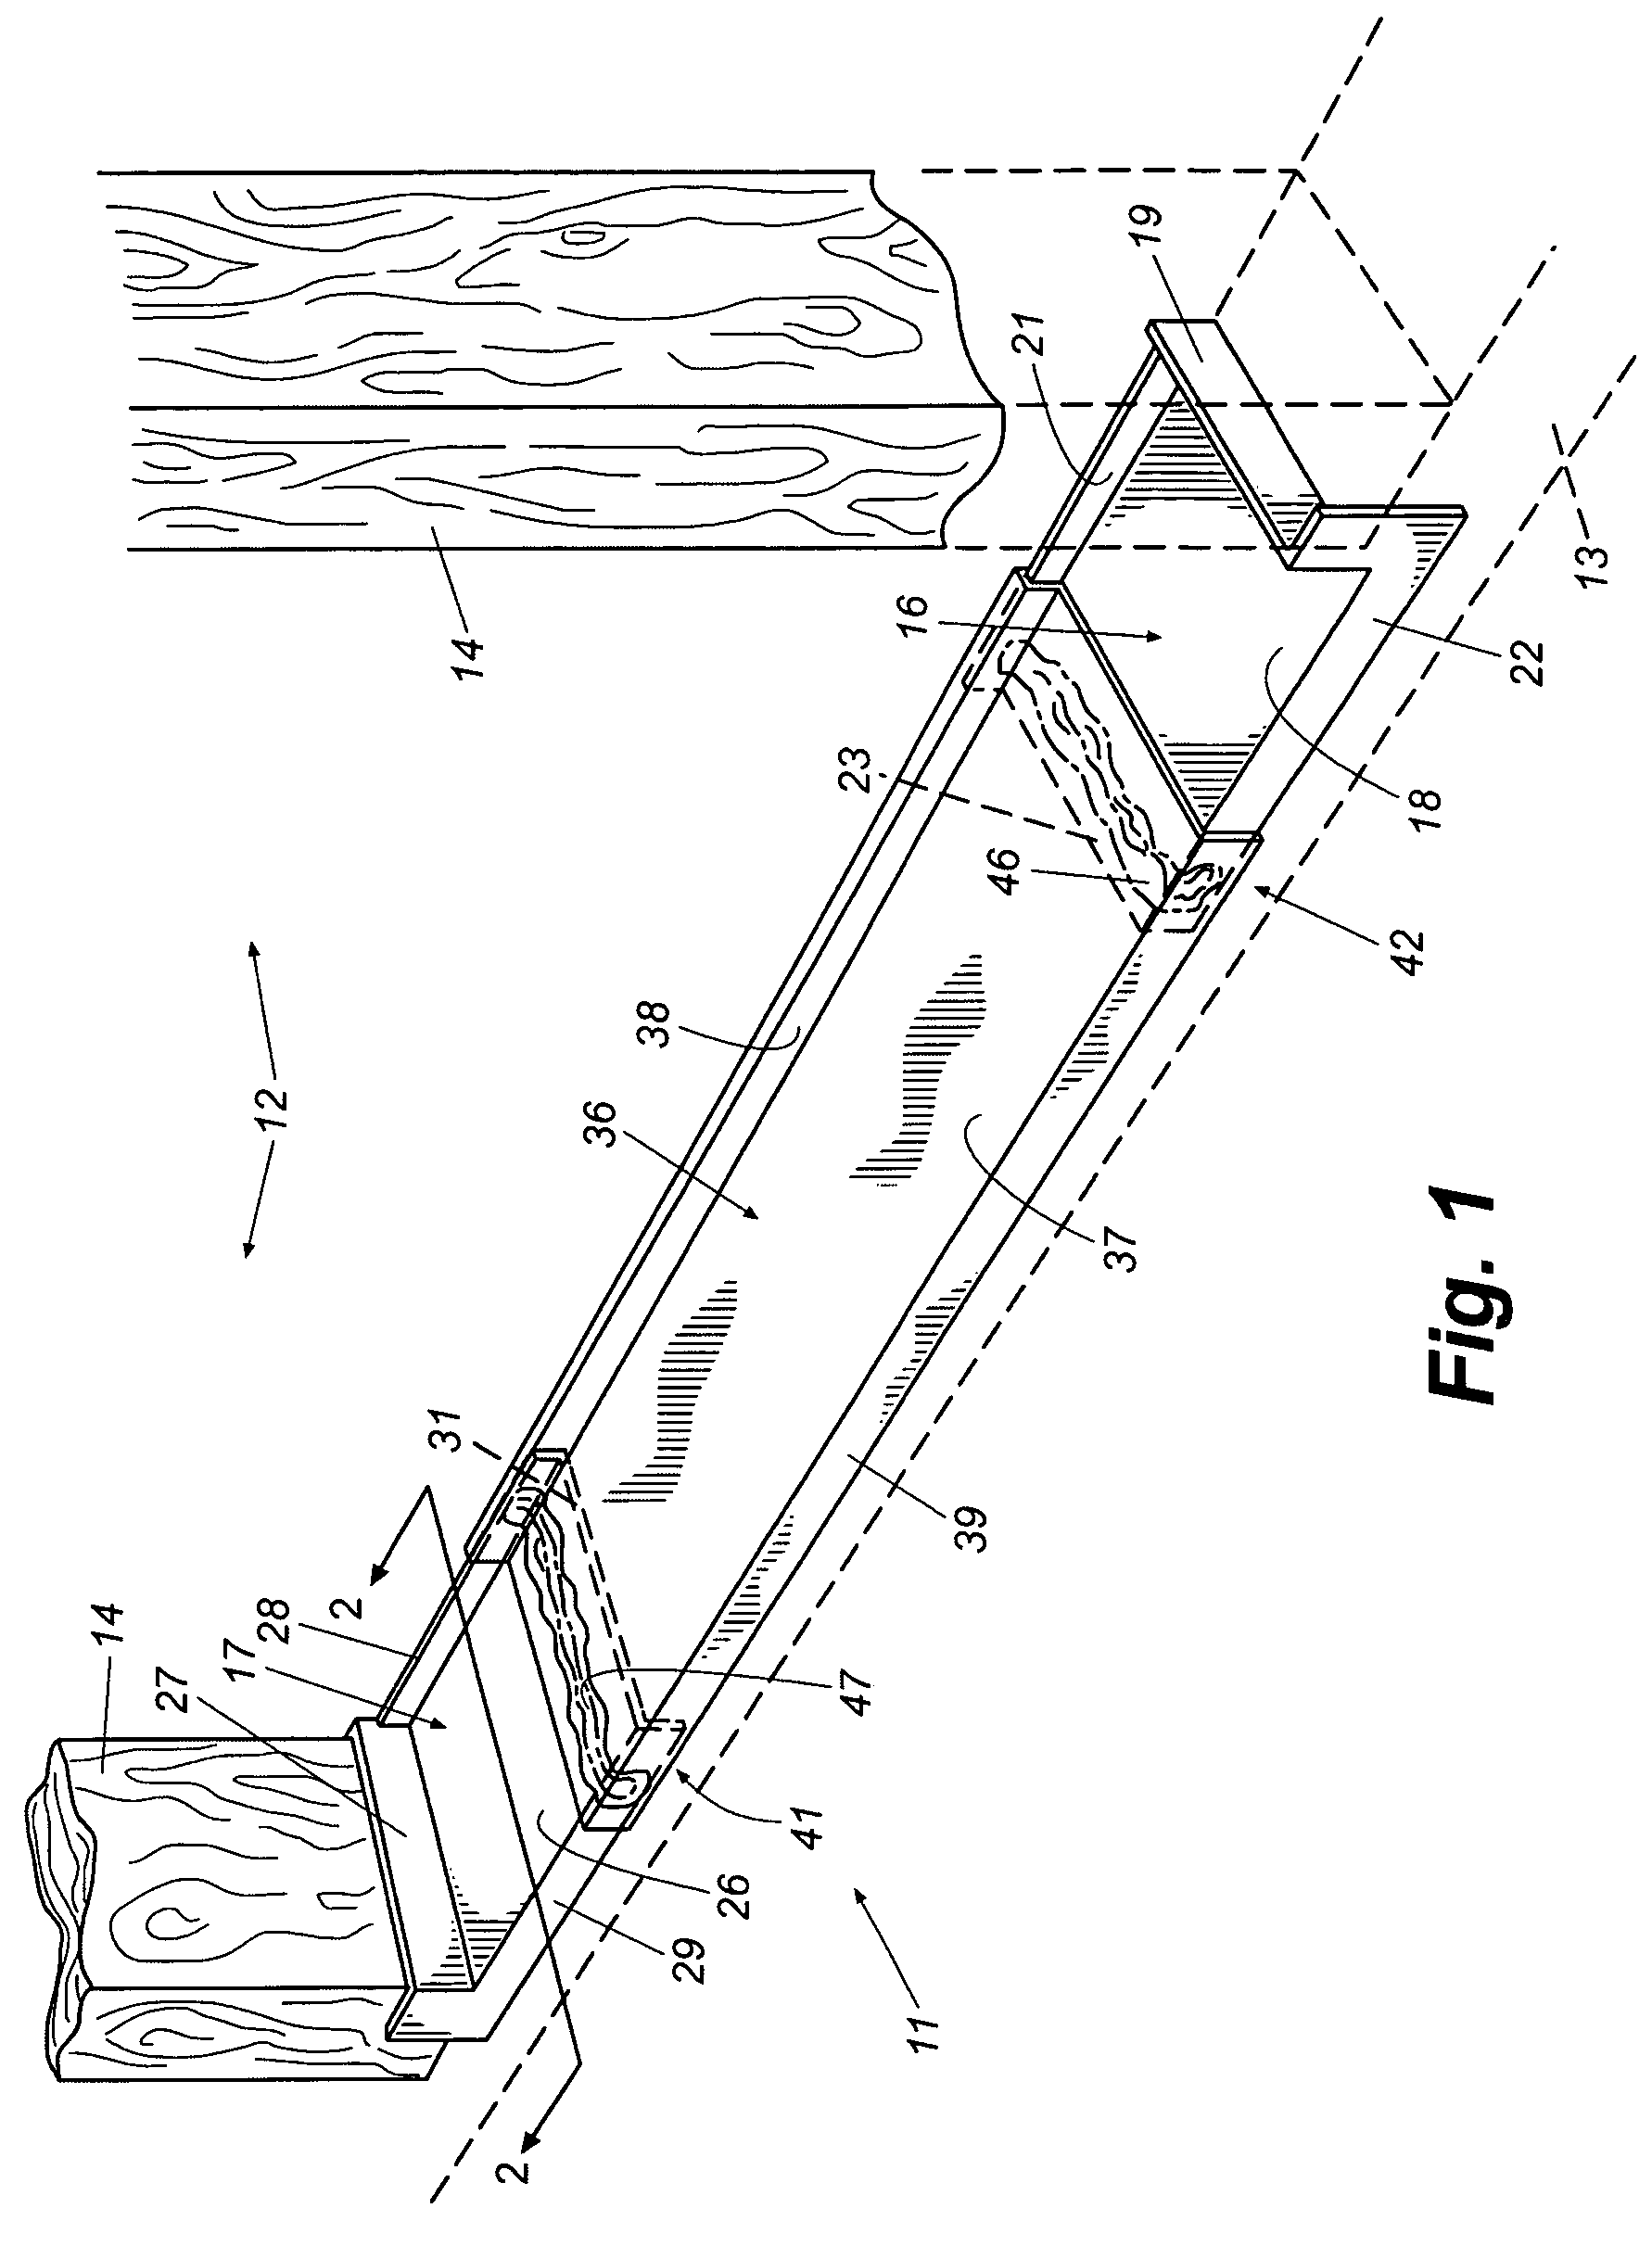 Sill pan system